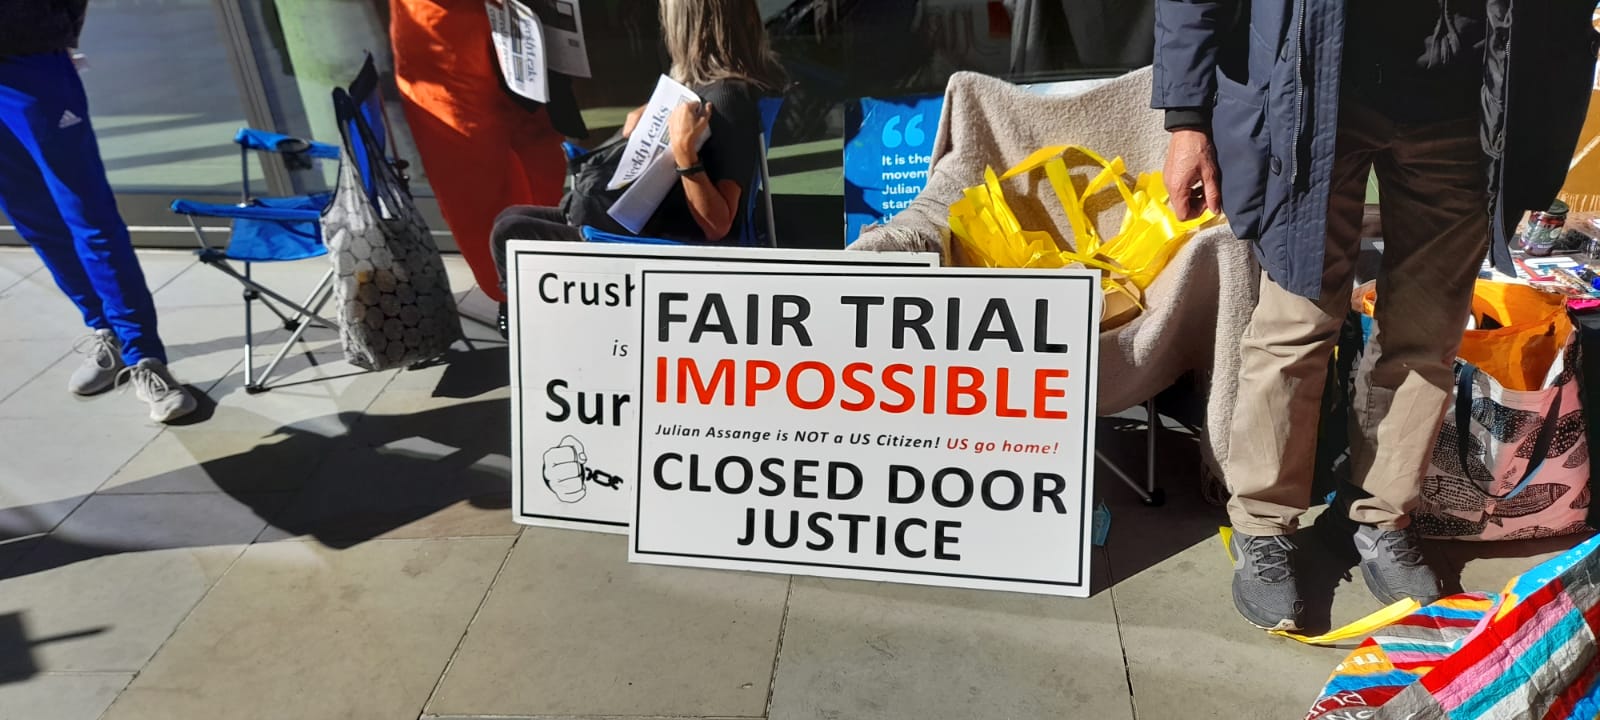 fair-trial-impossible-old-bailey-sept20.jpg